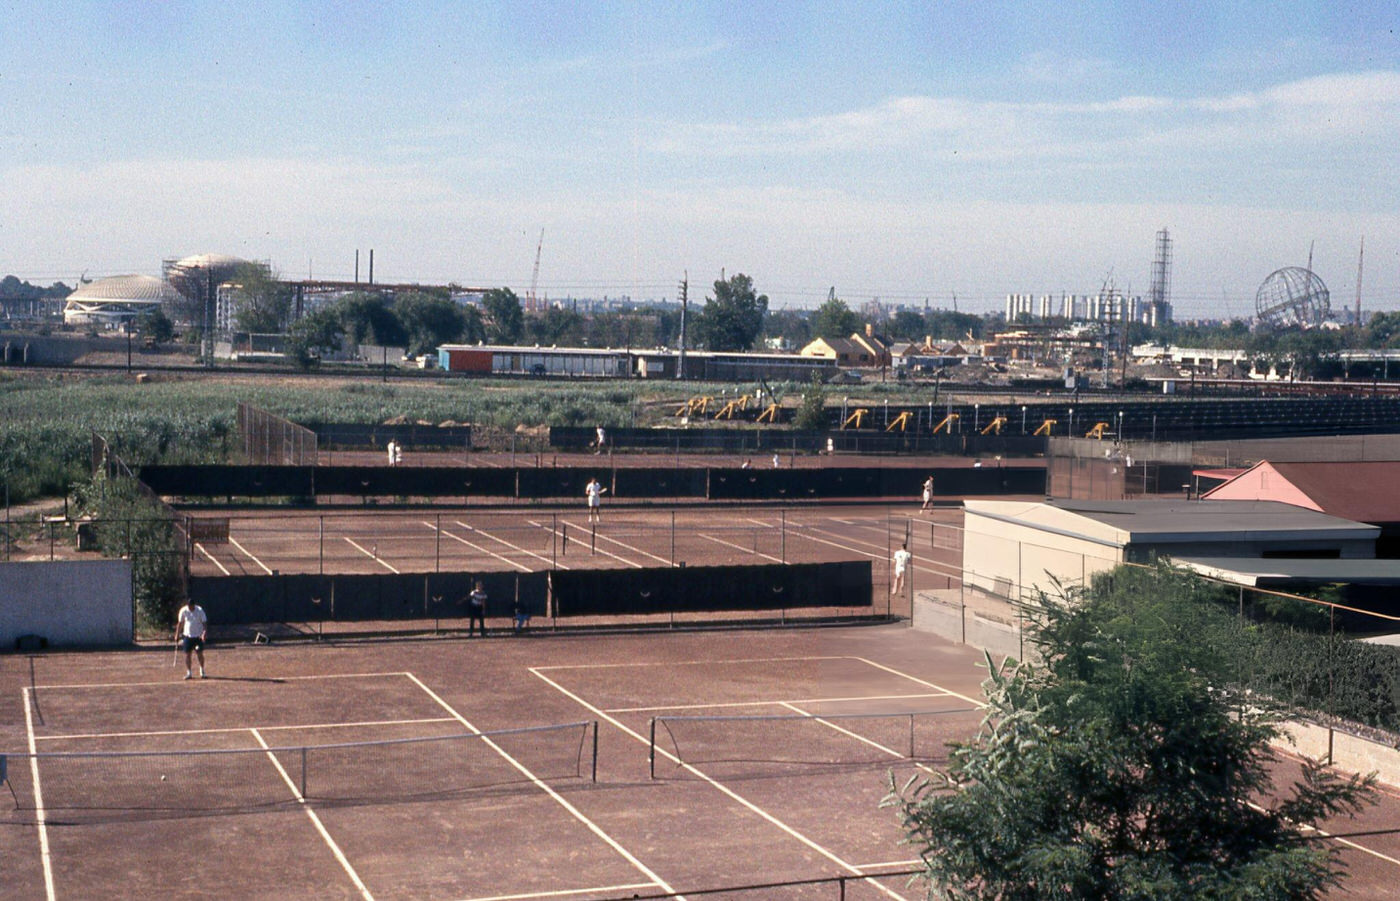 The Tennis Courts At Flushing Meadows Park In Corona, 1960S.